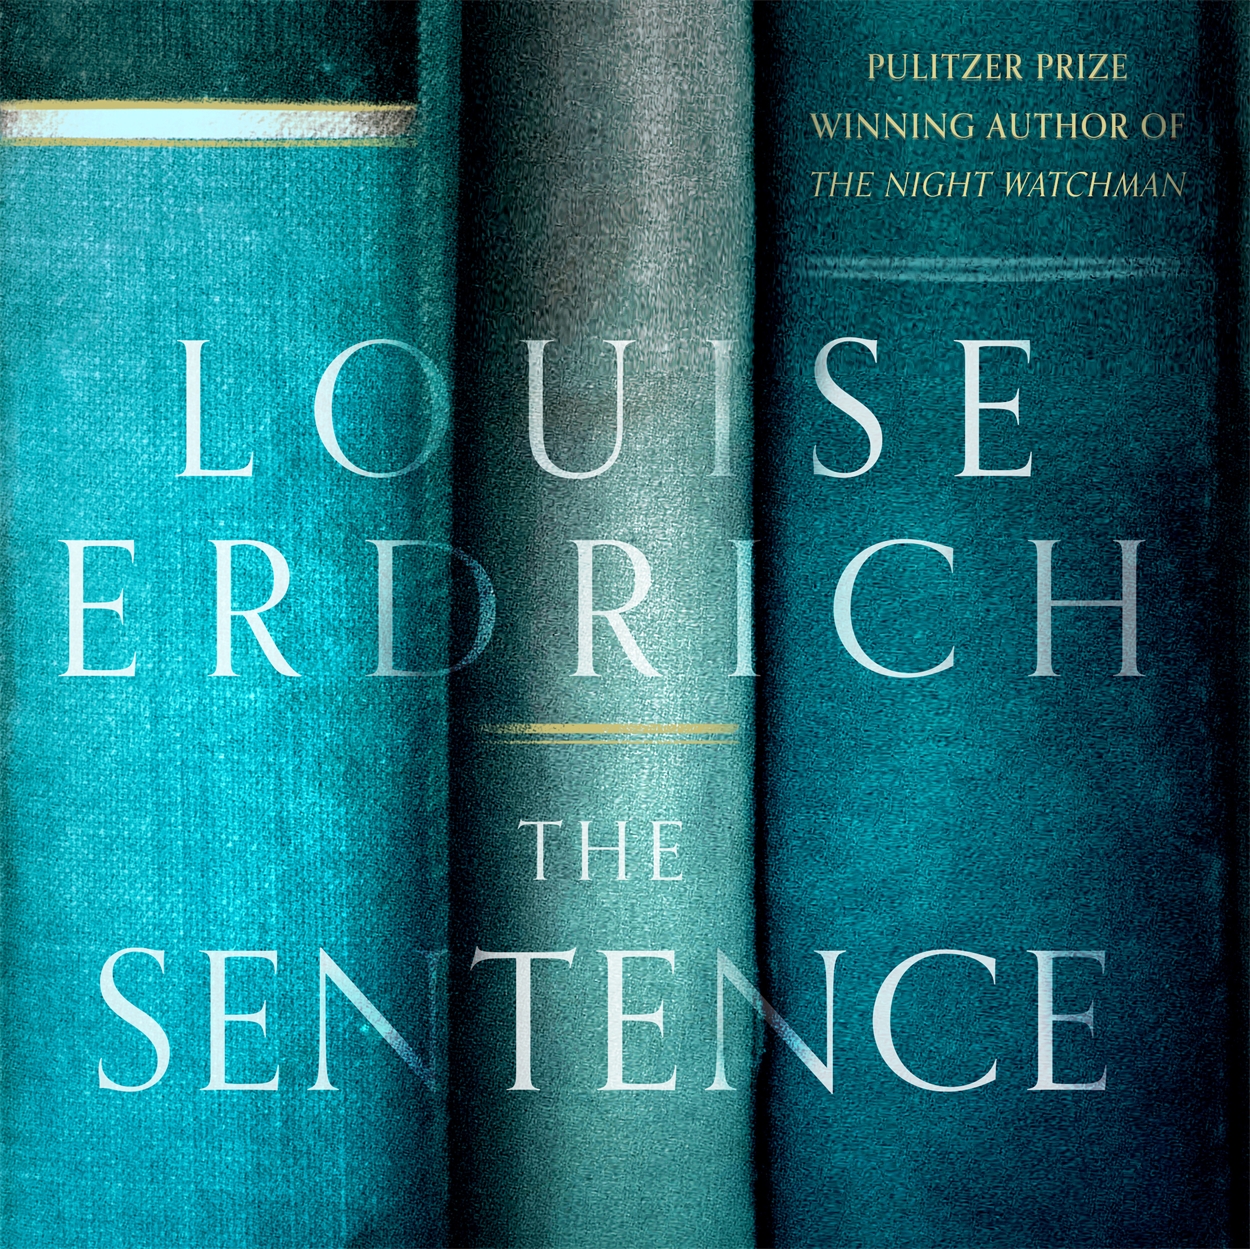 books mentioned in the sentence by louise erdrich